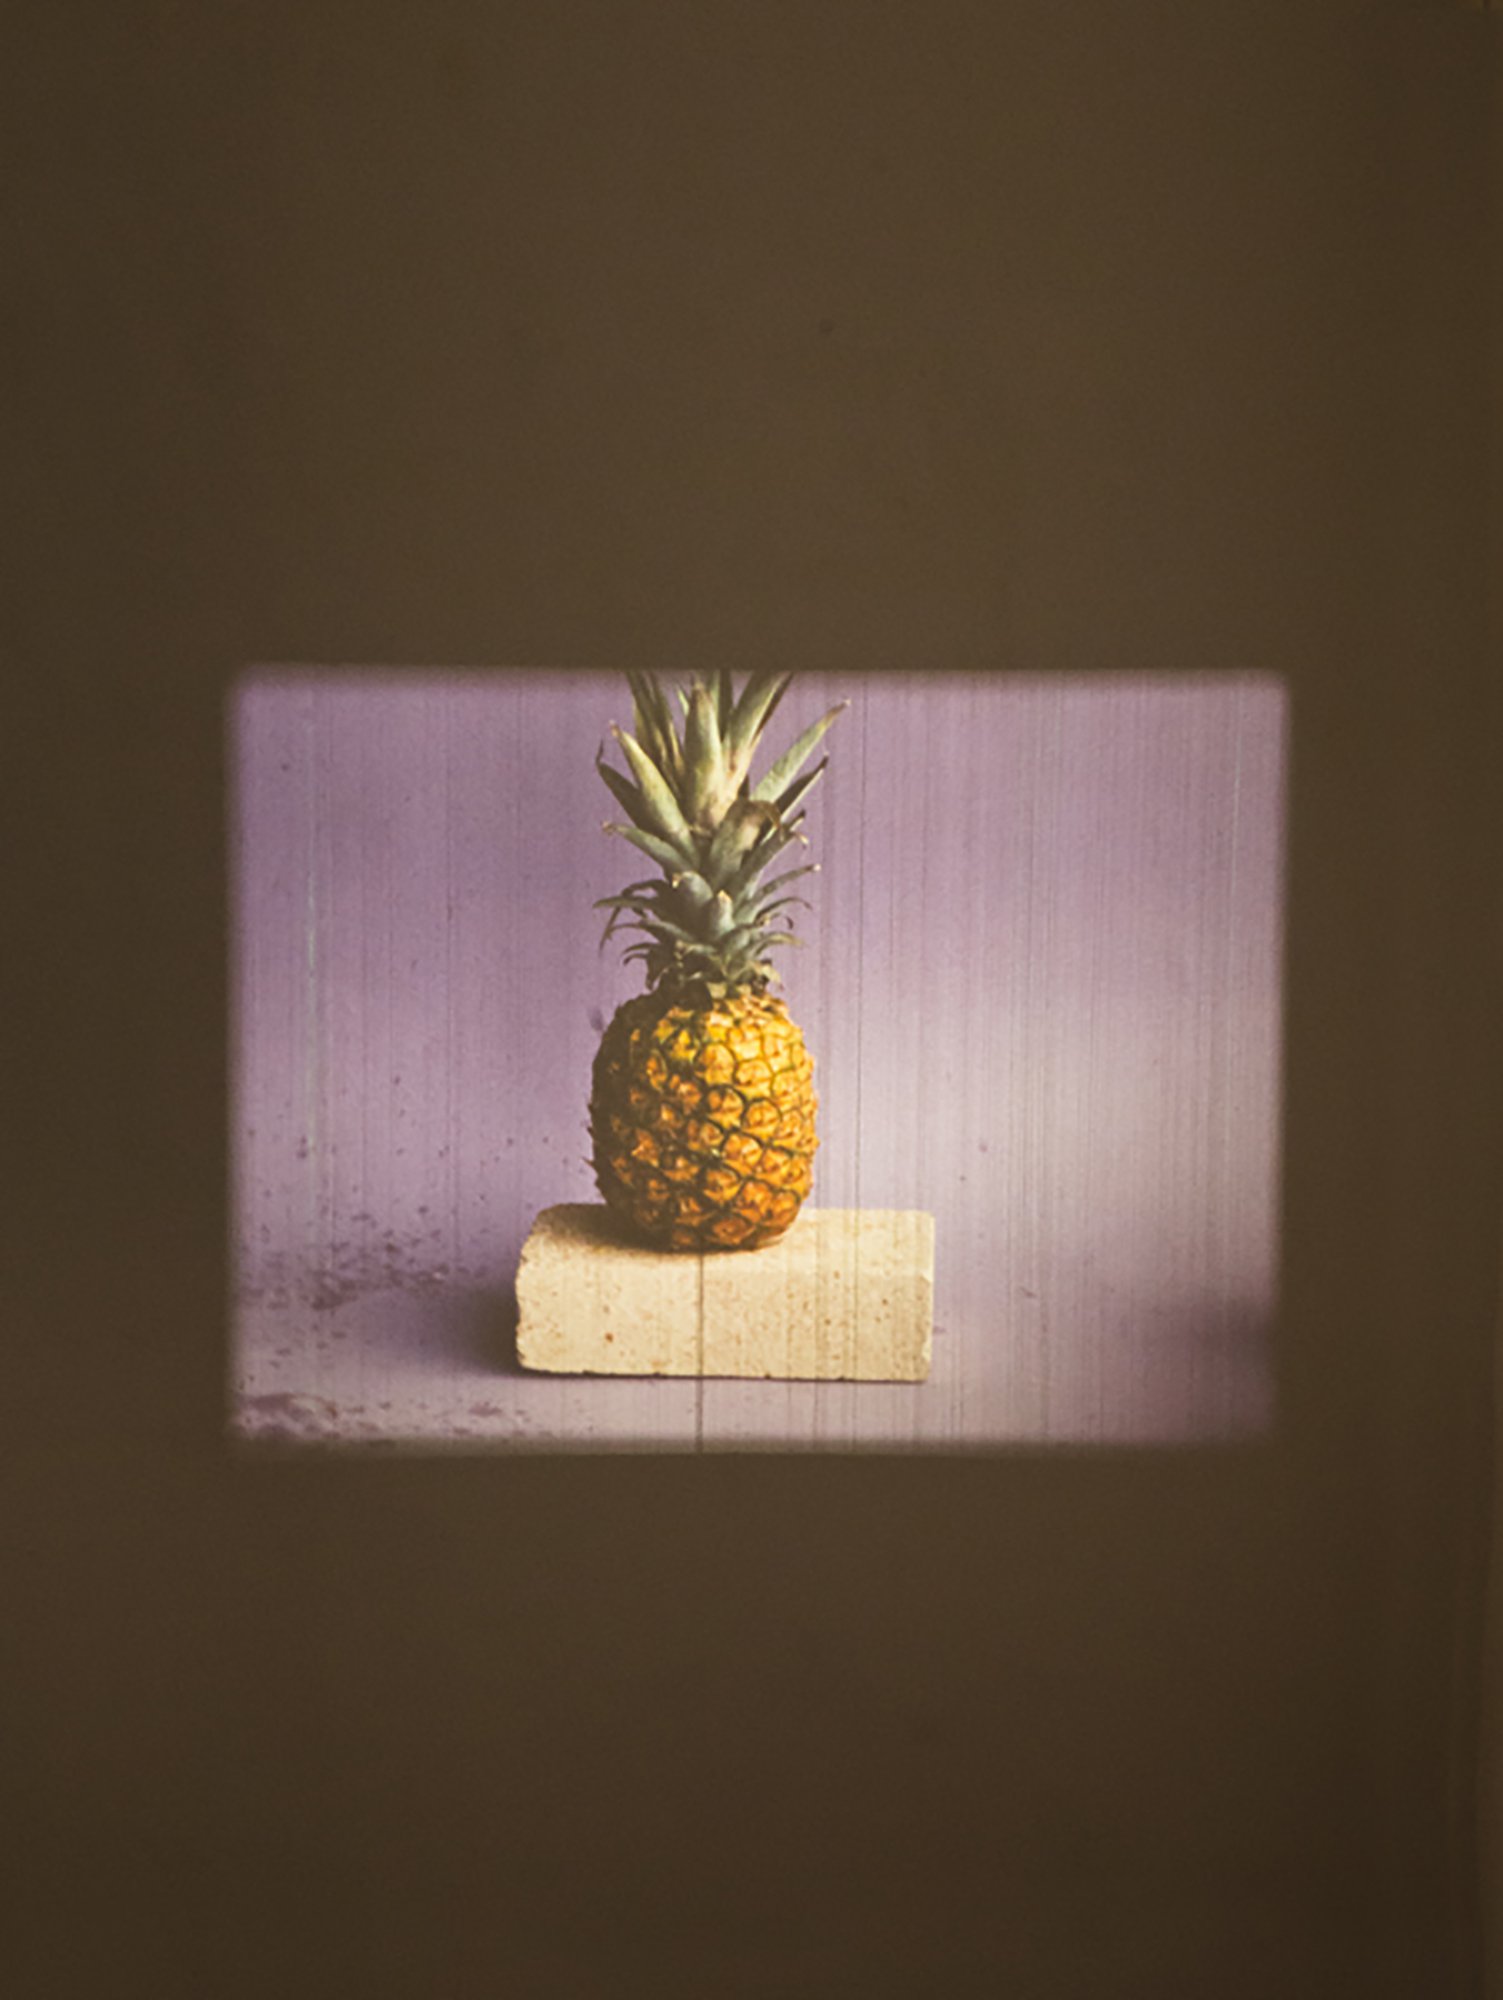 Tamara Henderson, Accent Grave on Ananas, 16 mm color film on loop with optical sound, 2 min. 44 sec., 2013. Installation view, Burn These Eyes Captain, And Throw Them In The Sea!!, Rodeo, Istanbul, 2013 – 2014